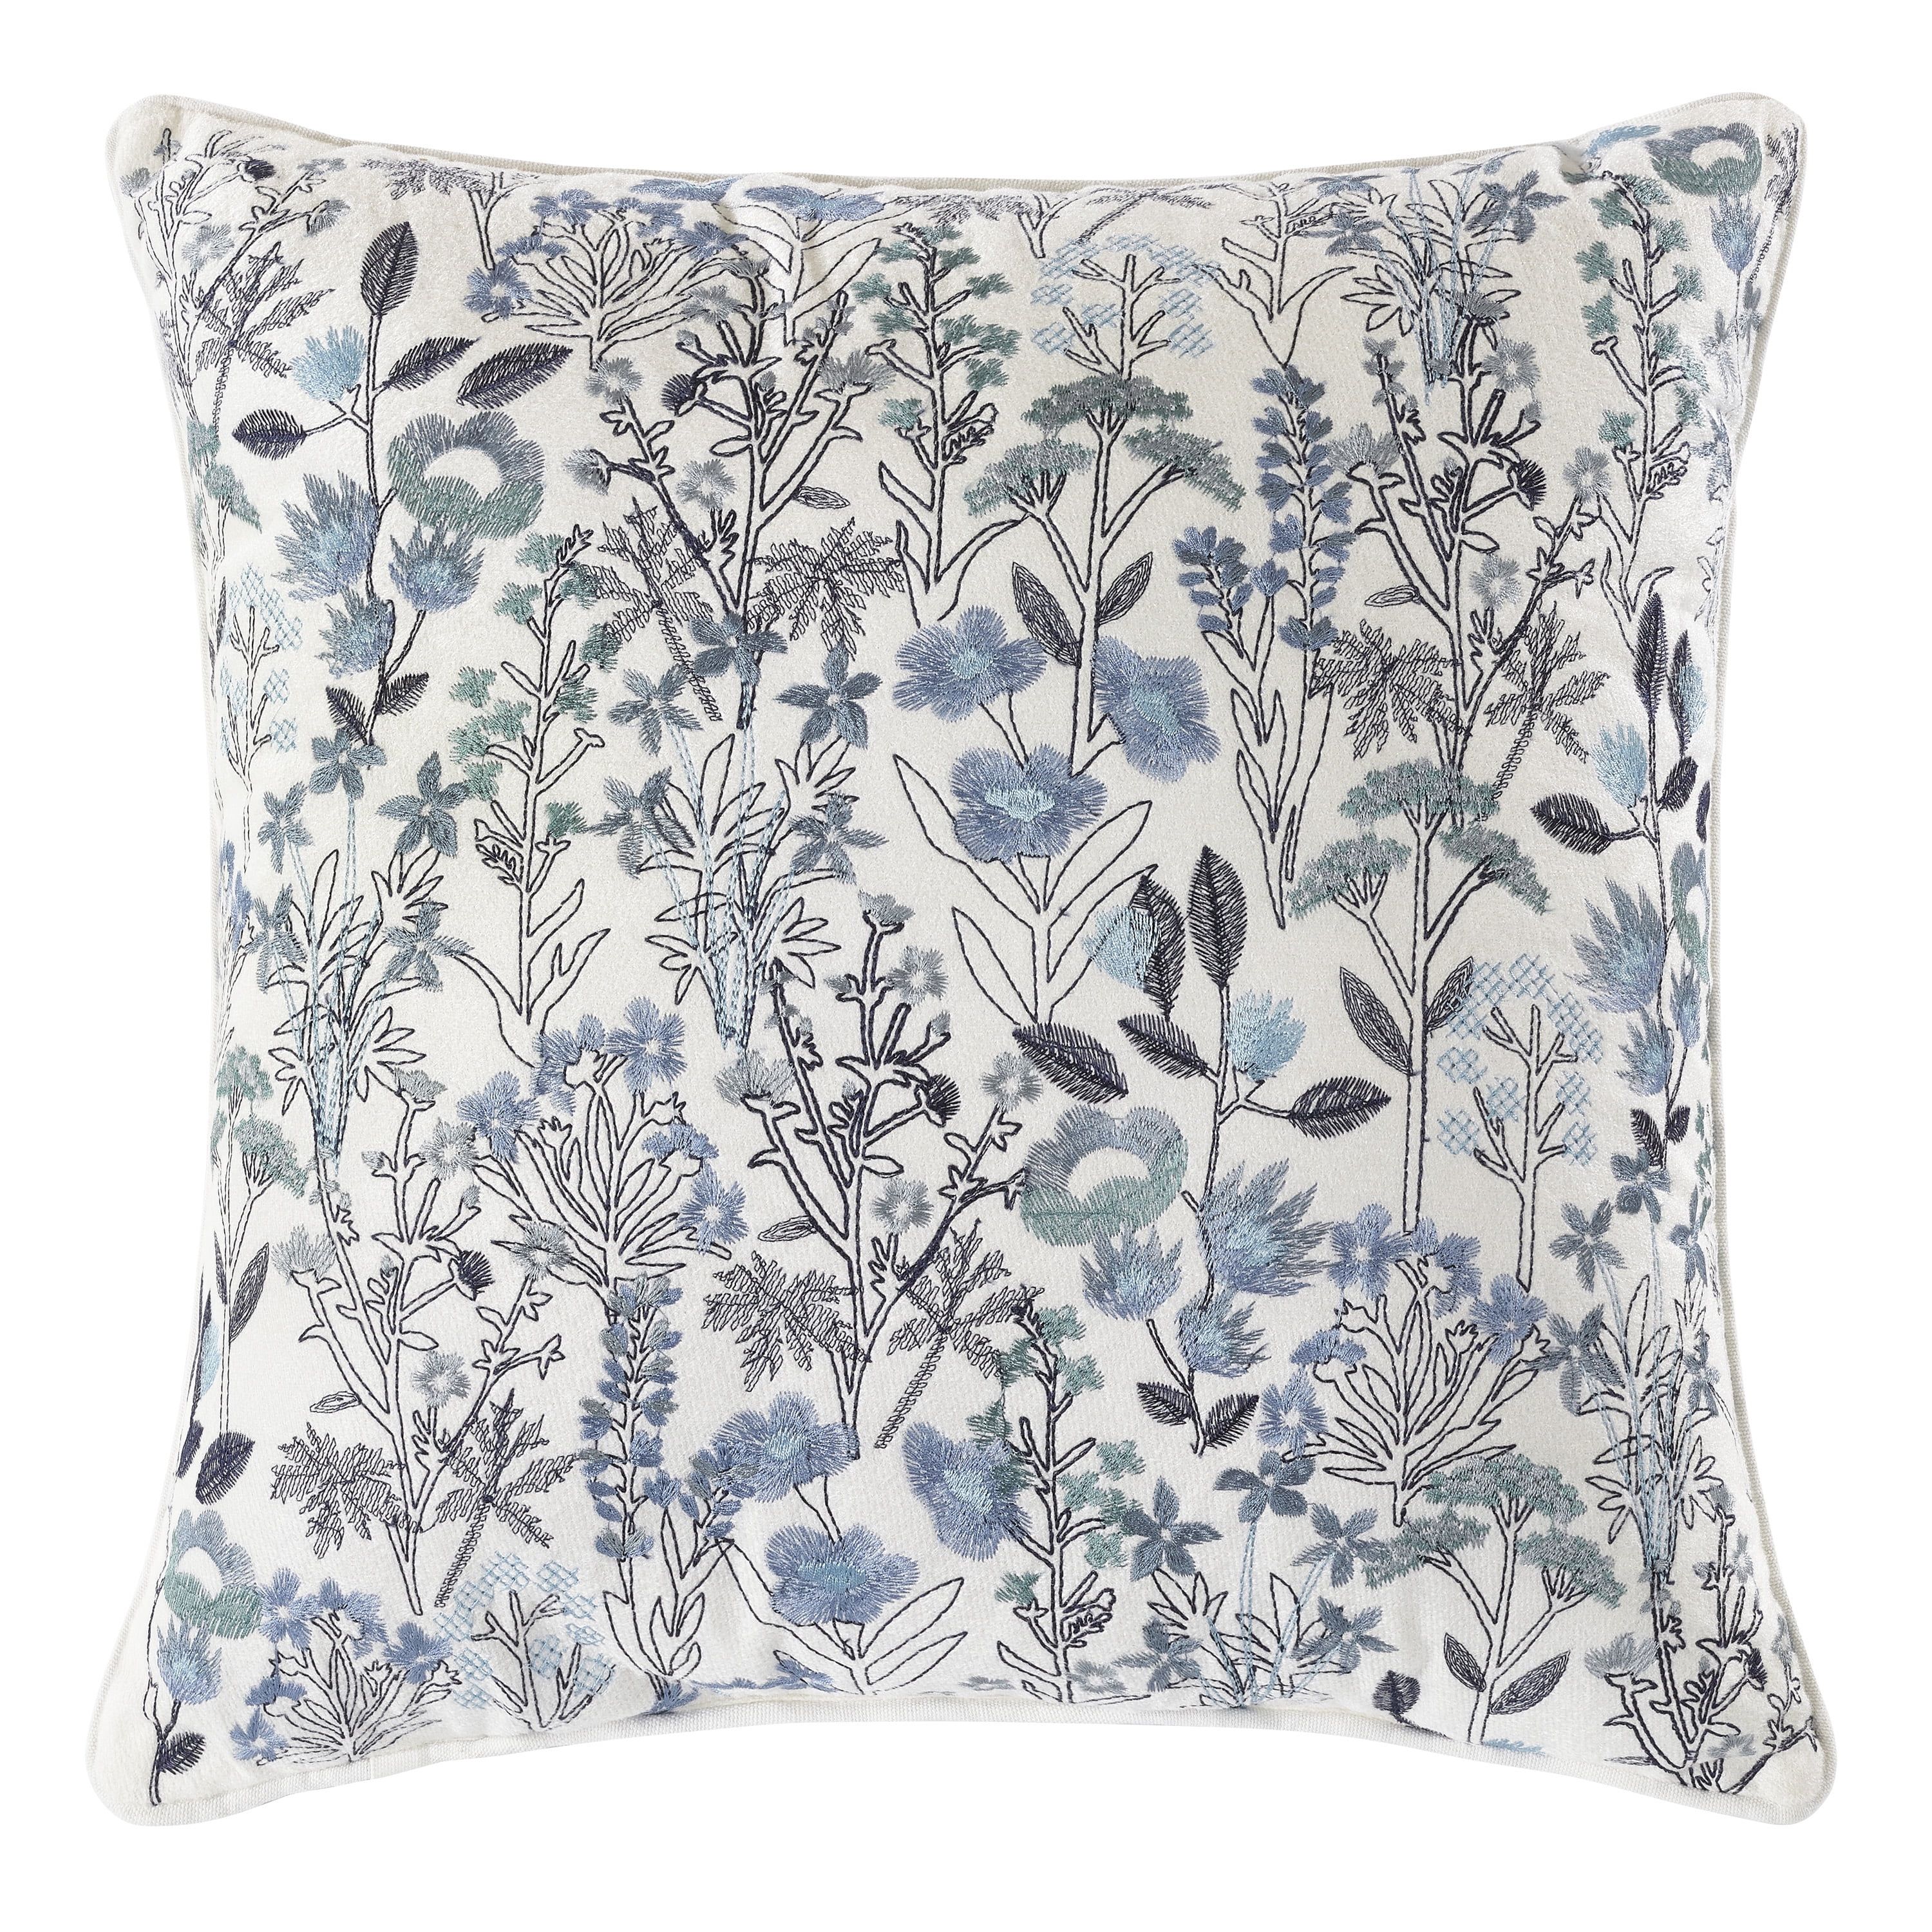 Mainstays 18"x18" Blue Embroidered Floral Decorative Throw Pillow, (1 count) | Walmart (US)